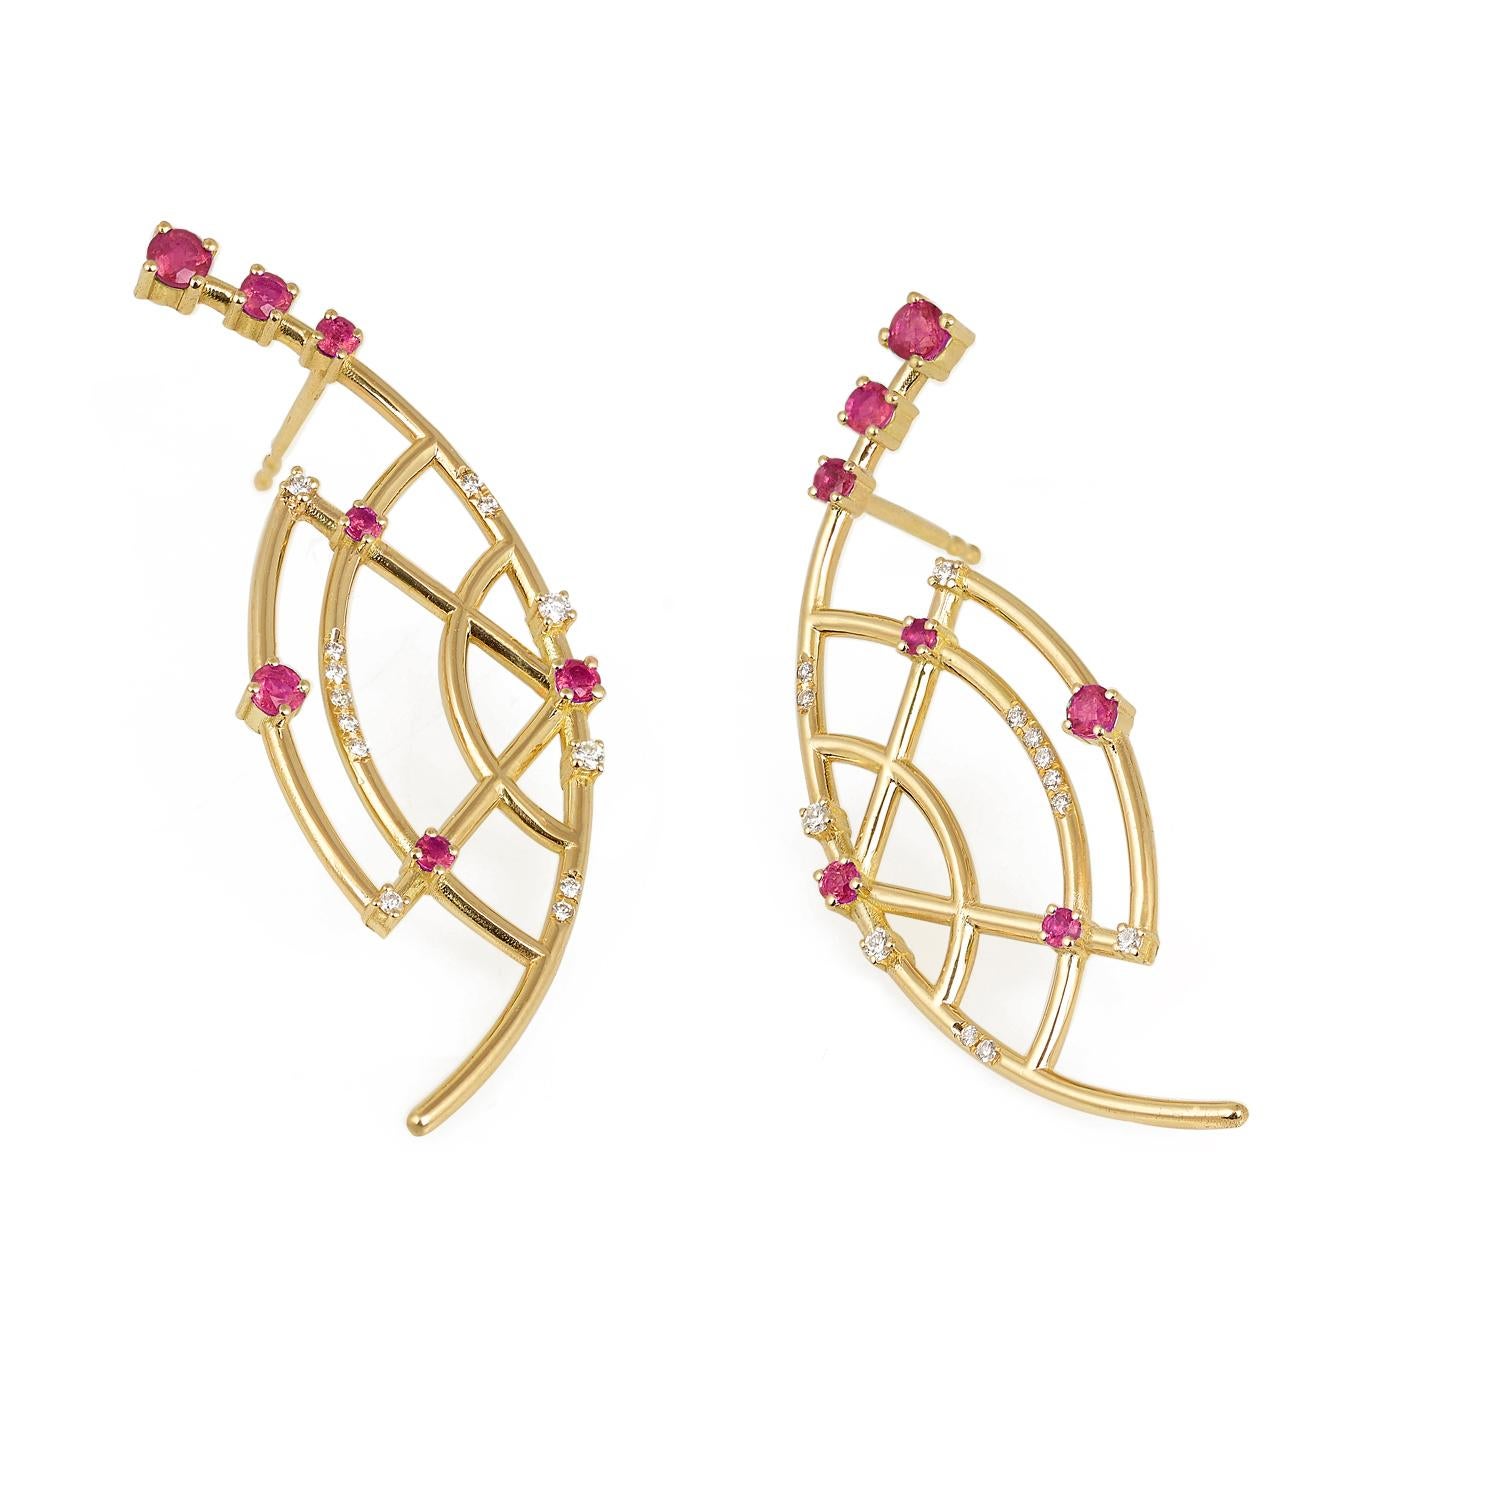 Designer: Alexia Gryllaki
Dimensions: L48x17mm
Weight: approximately 8.6g (pair)
Barcode: ING036ER

The Interlocking Geometry earrings in 18 karat yellow gold with rubies approx. 1.02cts and round brilliant-cut diamonds approx. 0.18cts.

About the